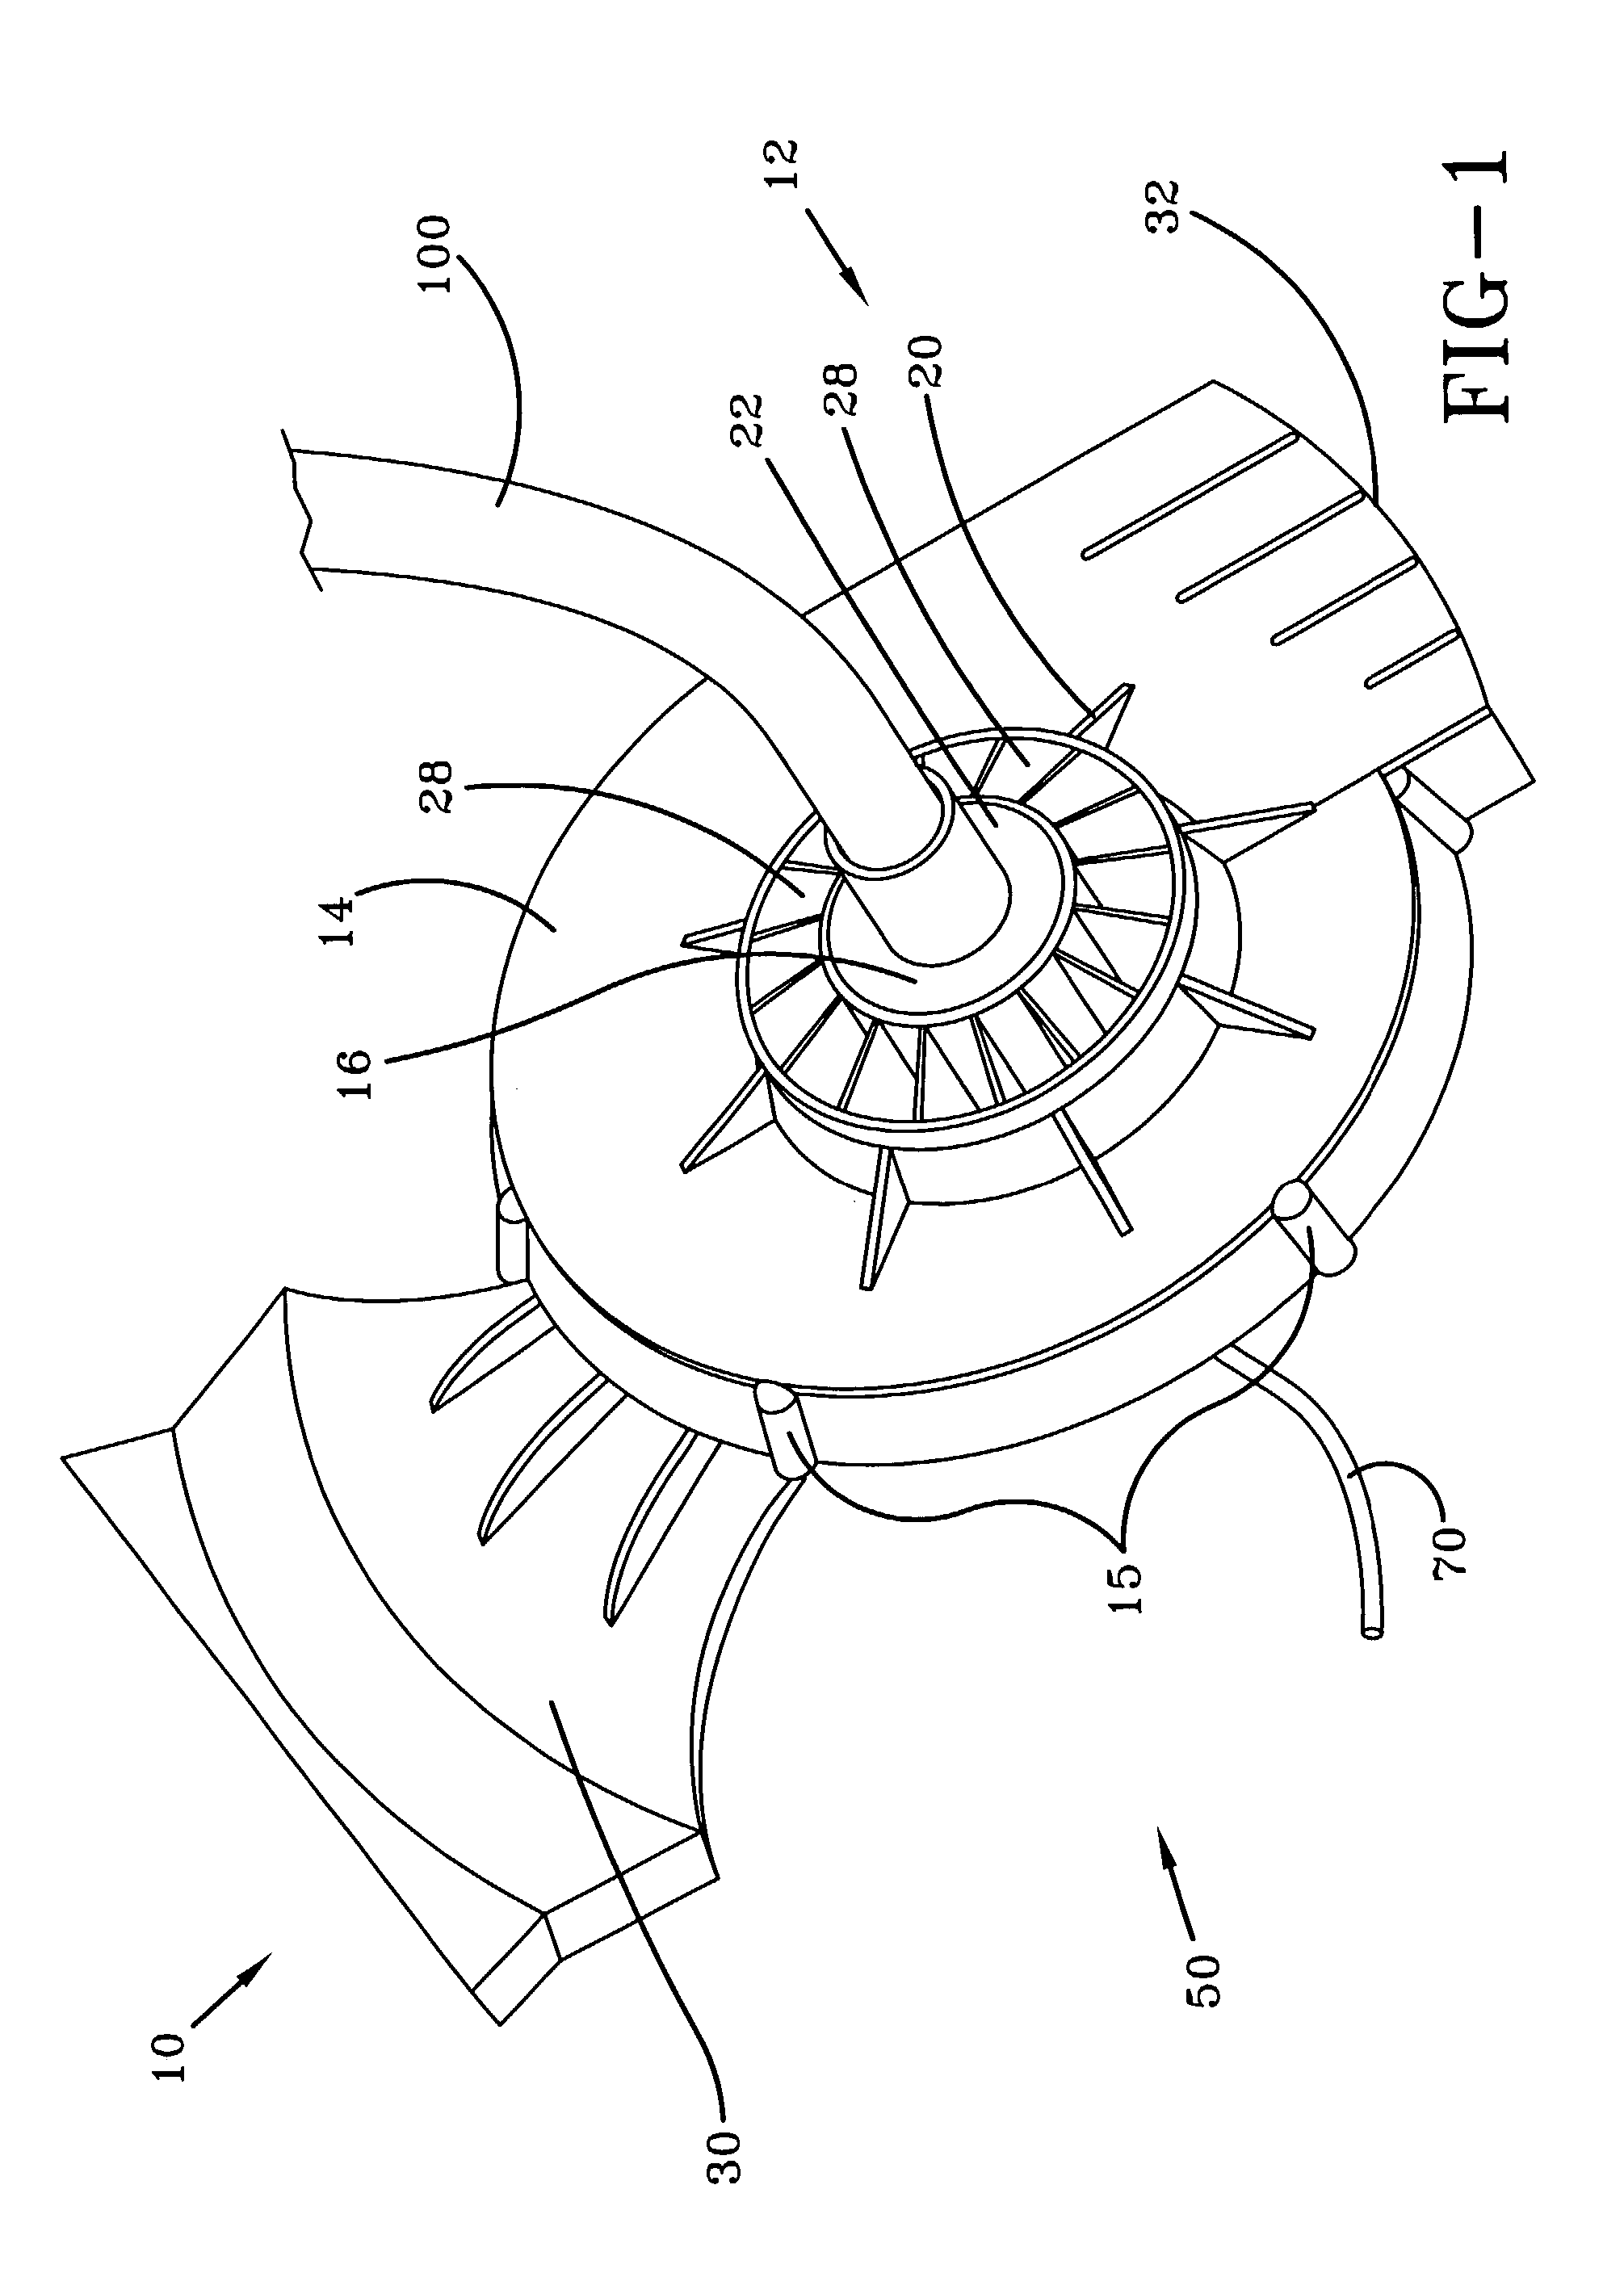 Combination blower assembly and string trimmer